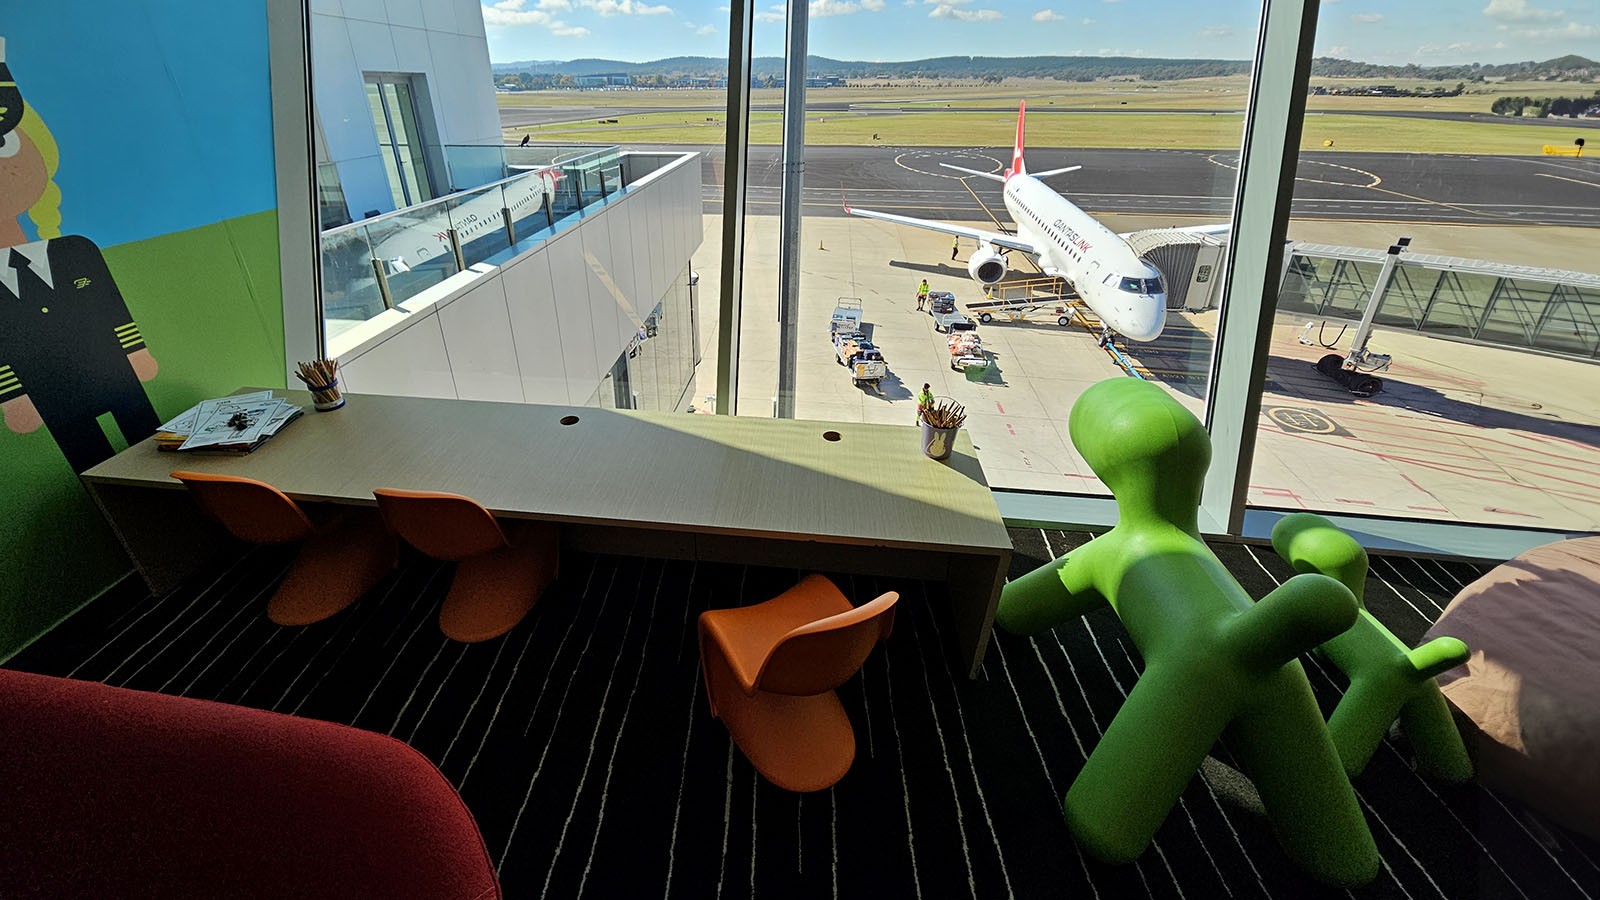 Space for kids in Canberra's Qantas Club